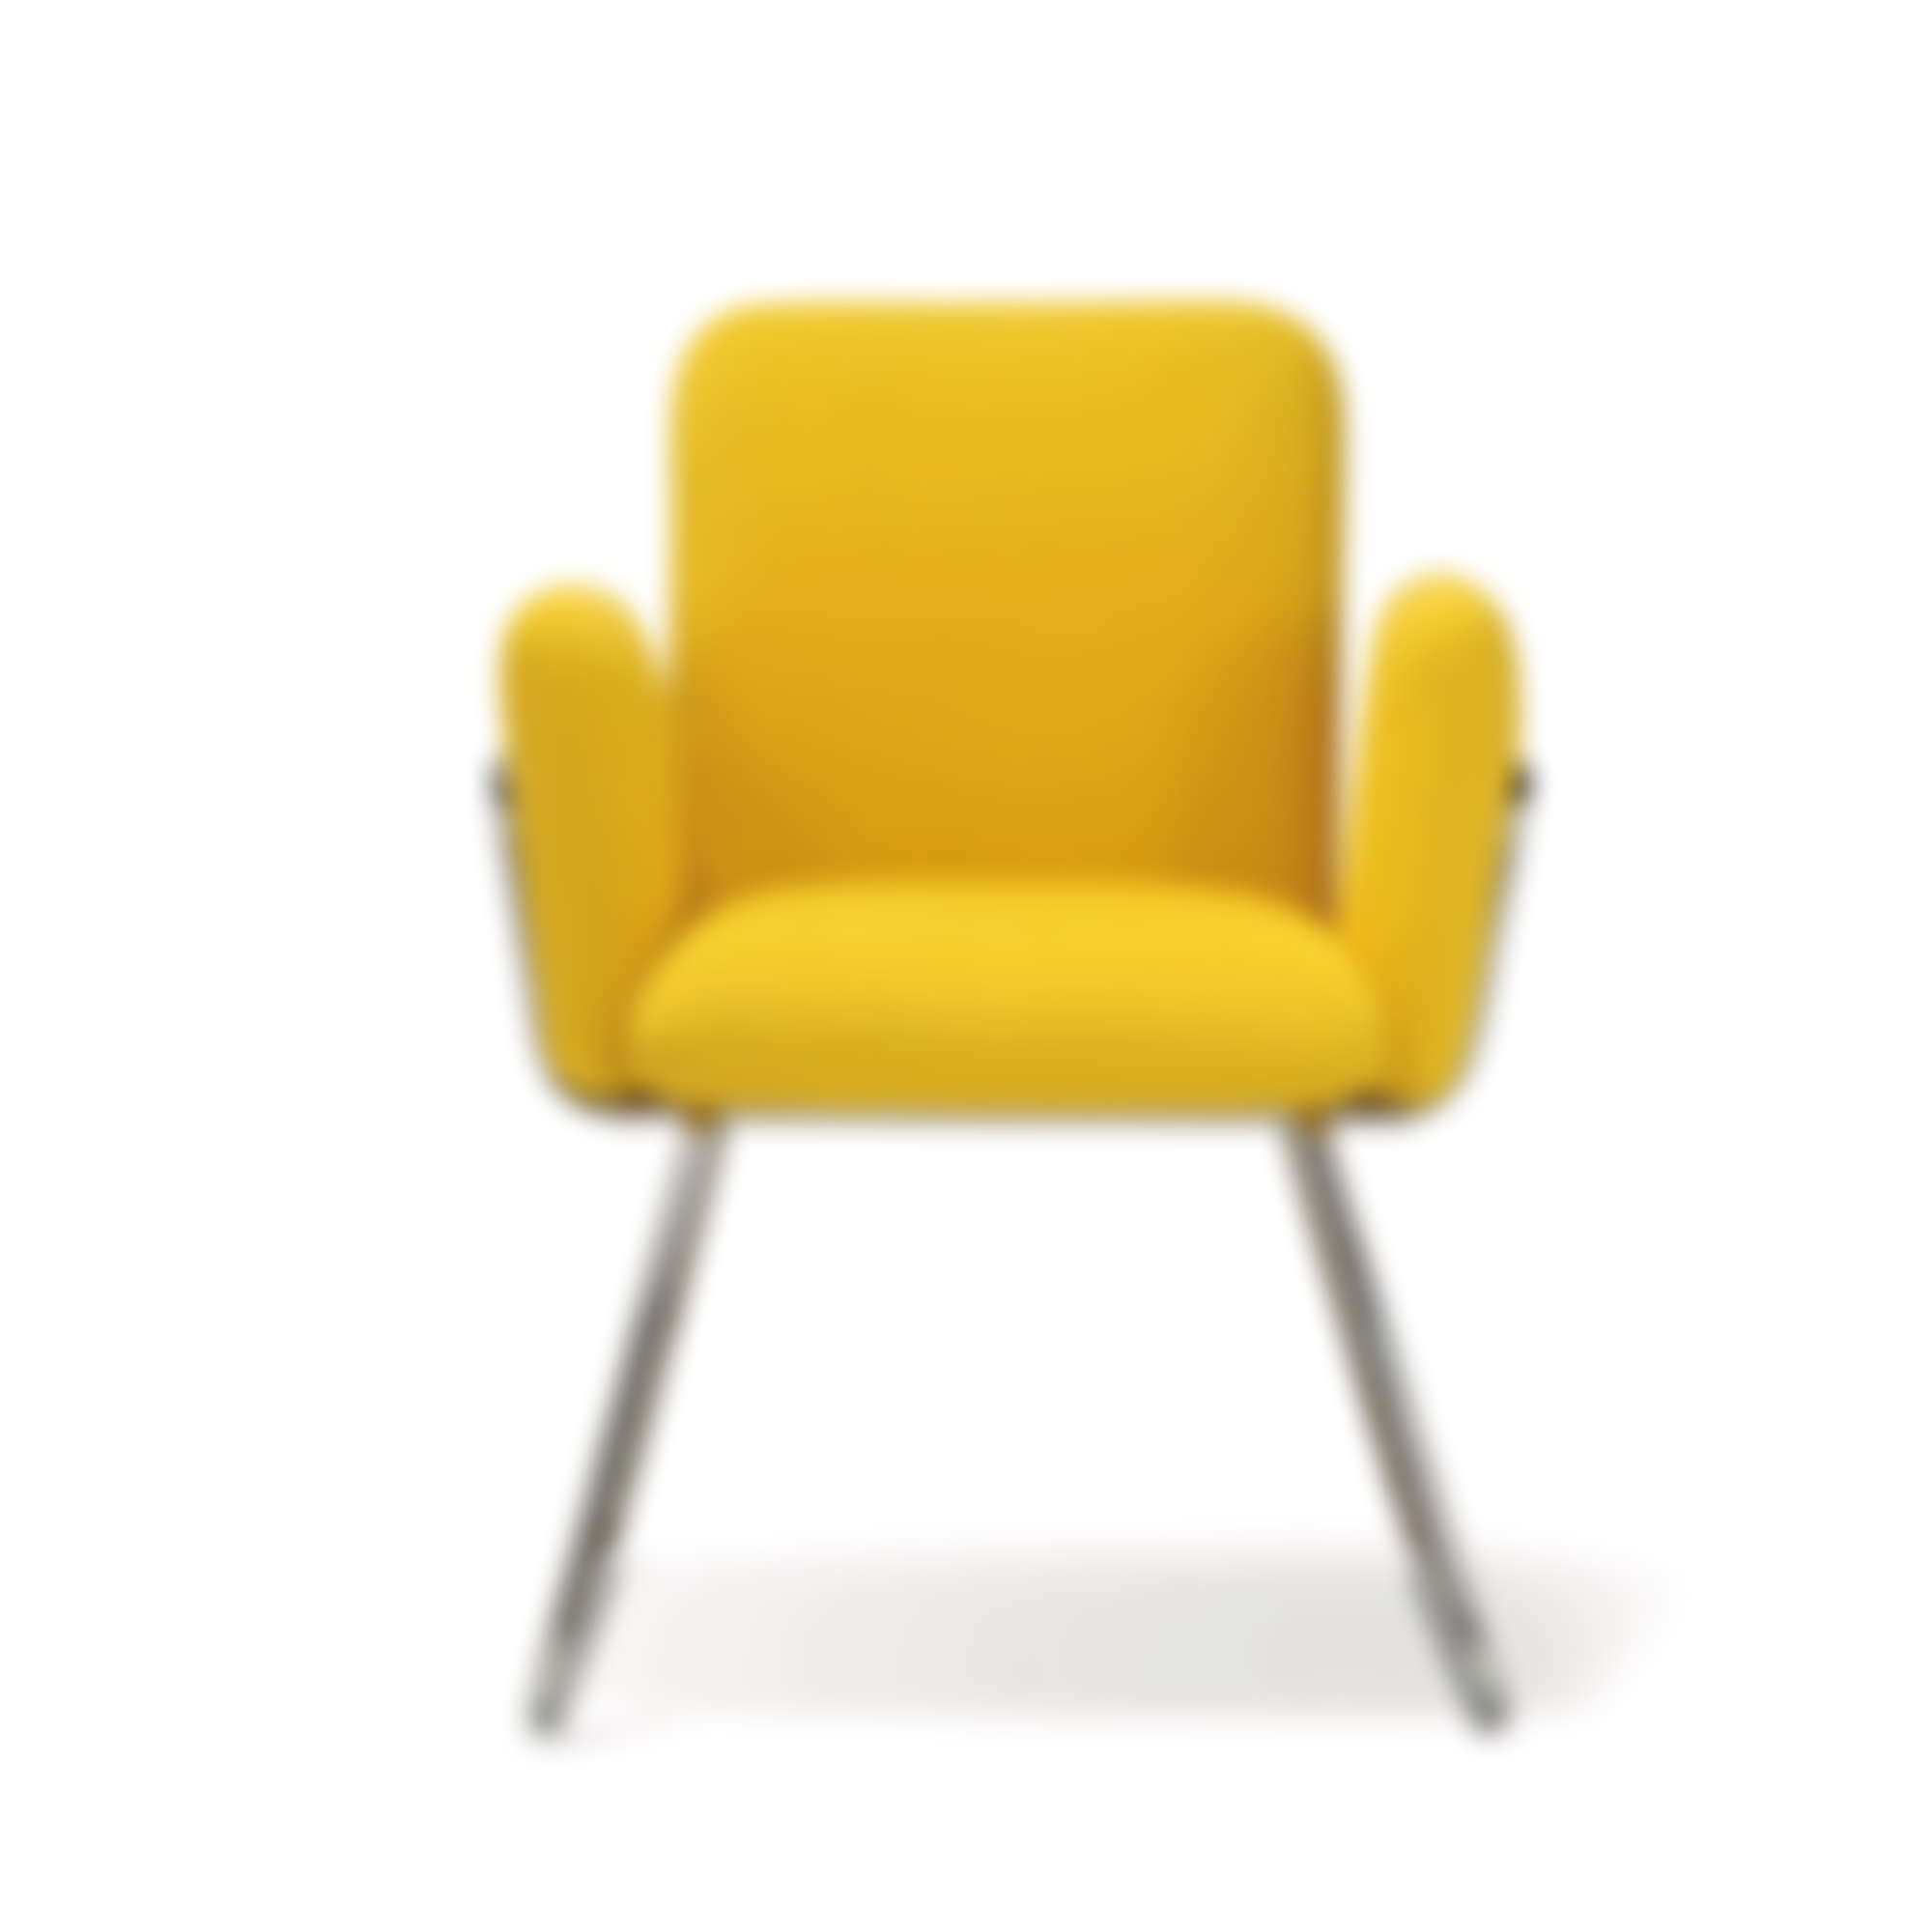 living-contemporary-slurp-yellow-upholstered-dining-chair-by-adrenalina